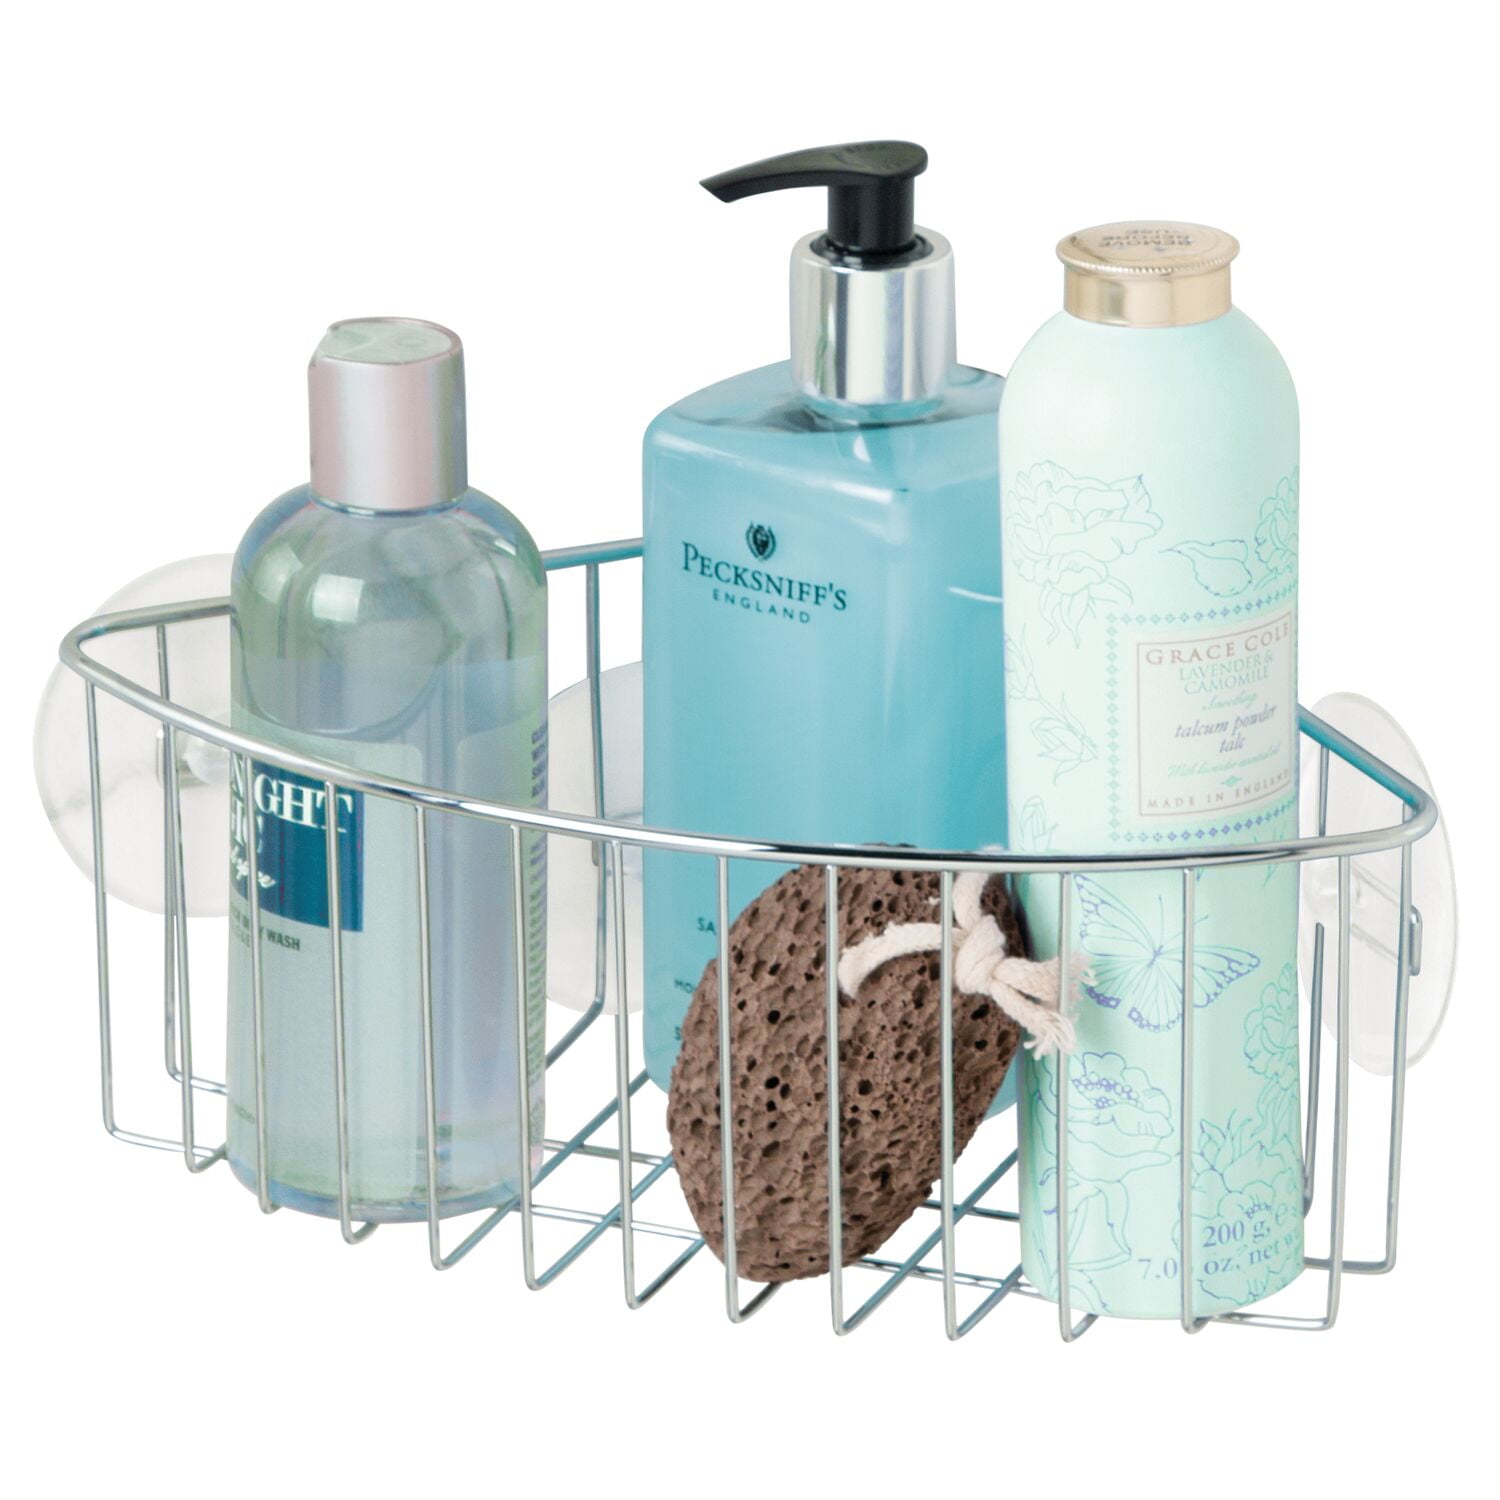 Conditioner Soap iDesign Plastic Suction Shower Caddy Basket for Shampoo in x 